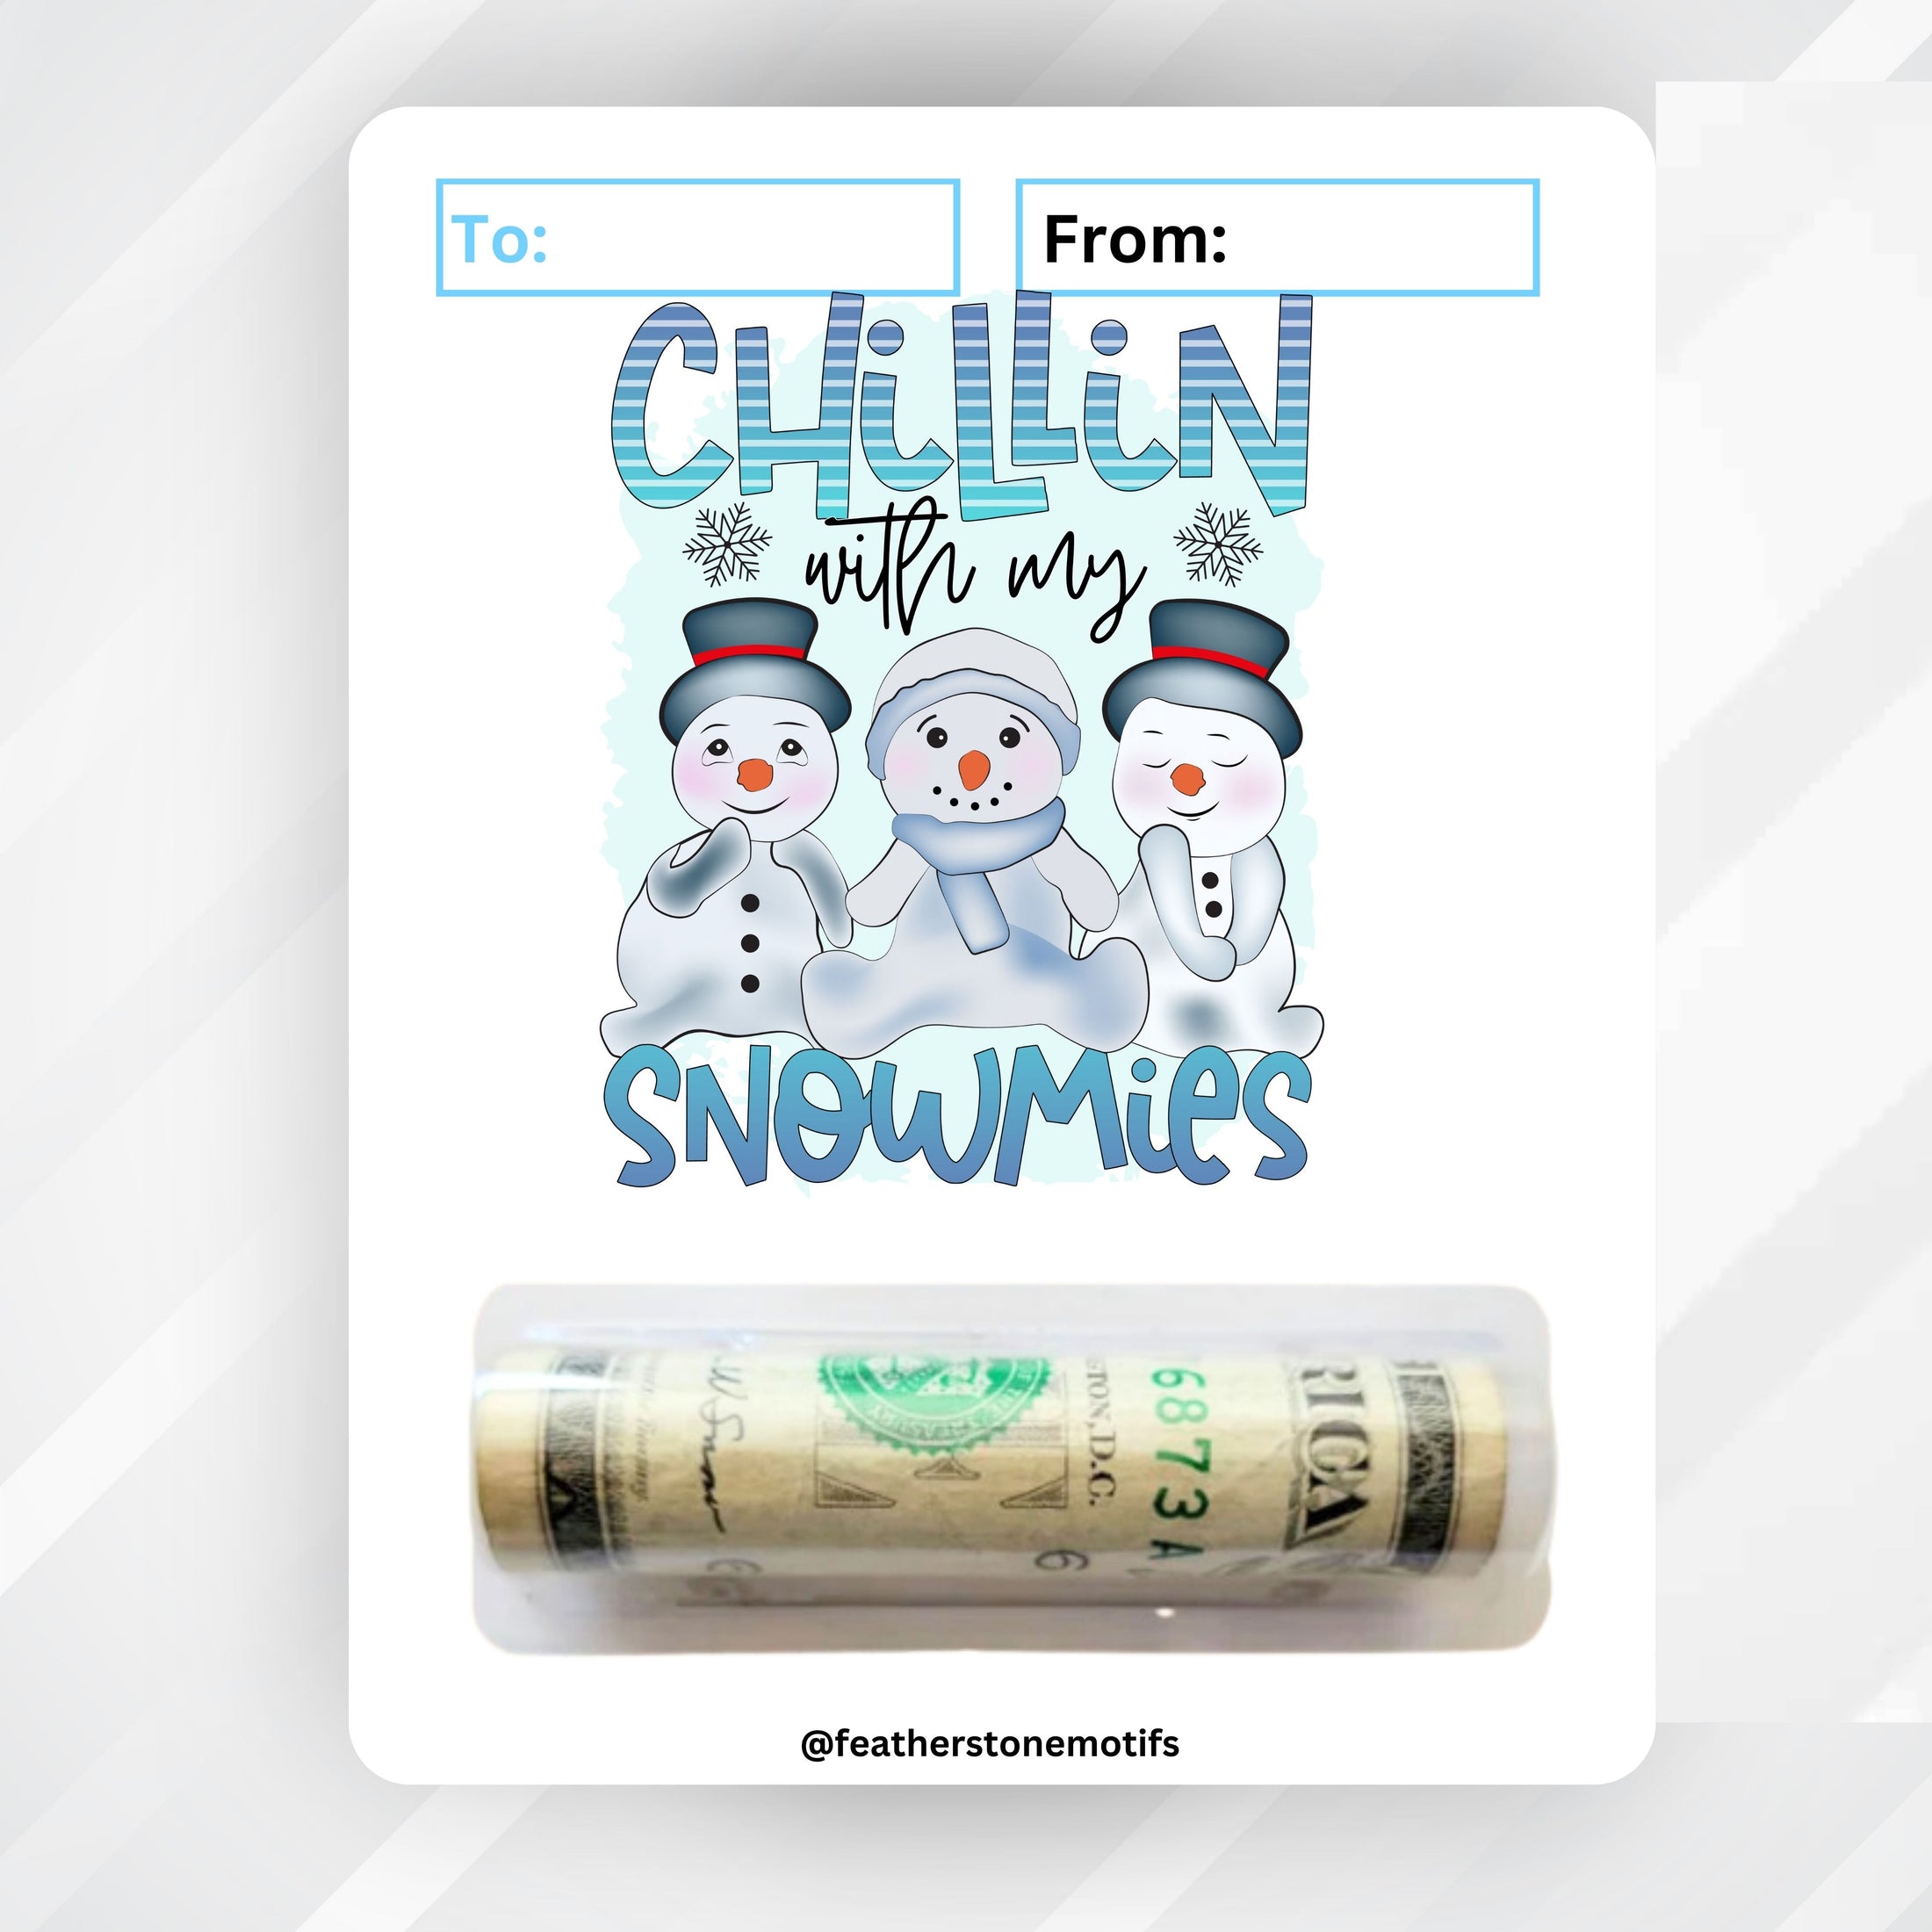 This image shows the money tube attached to the Snowmies Money Card.